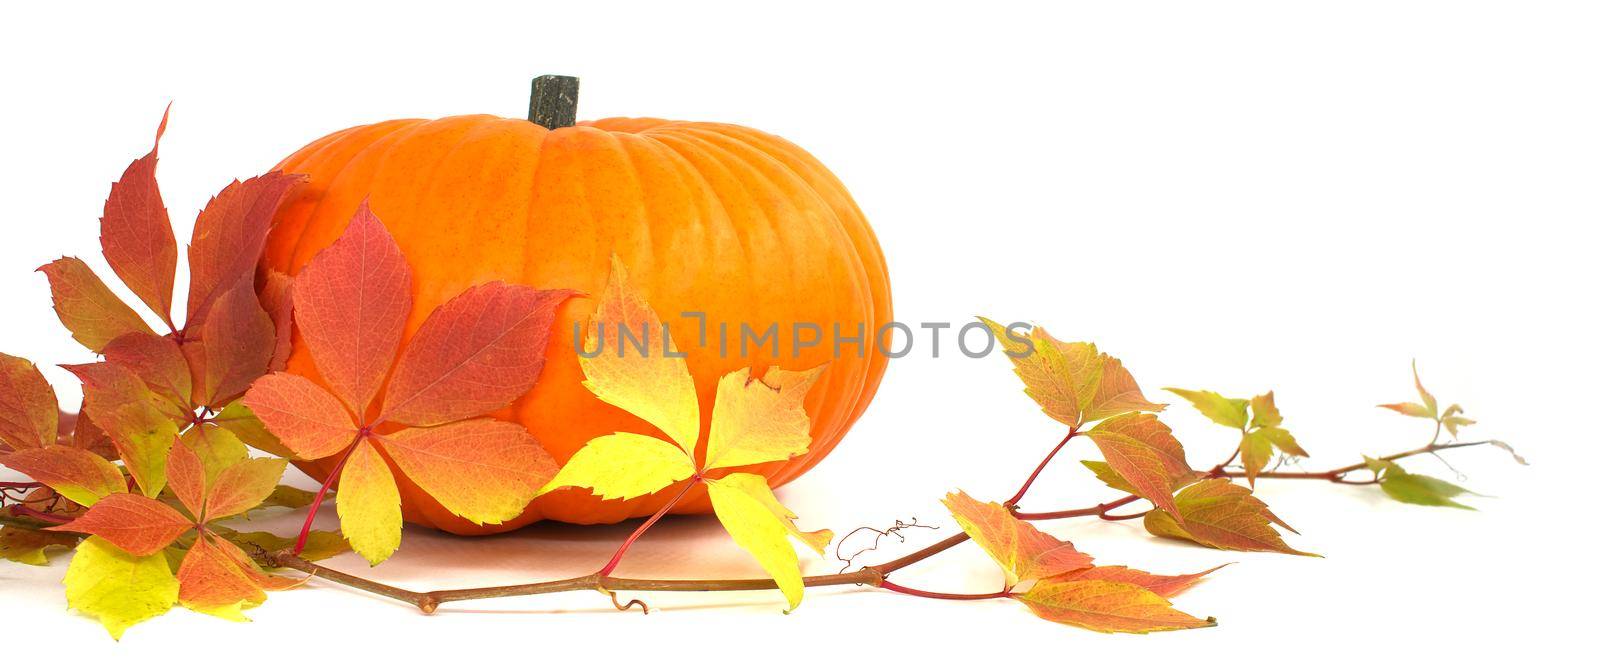 Thanksgiving, Halloween autumnal or fall banner by NetPix